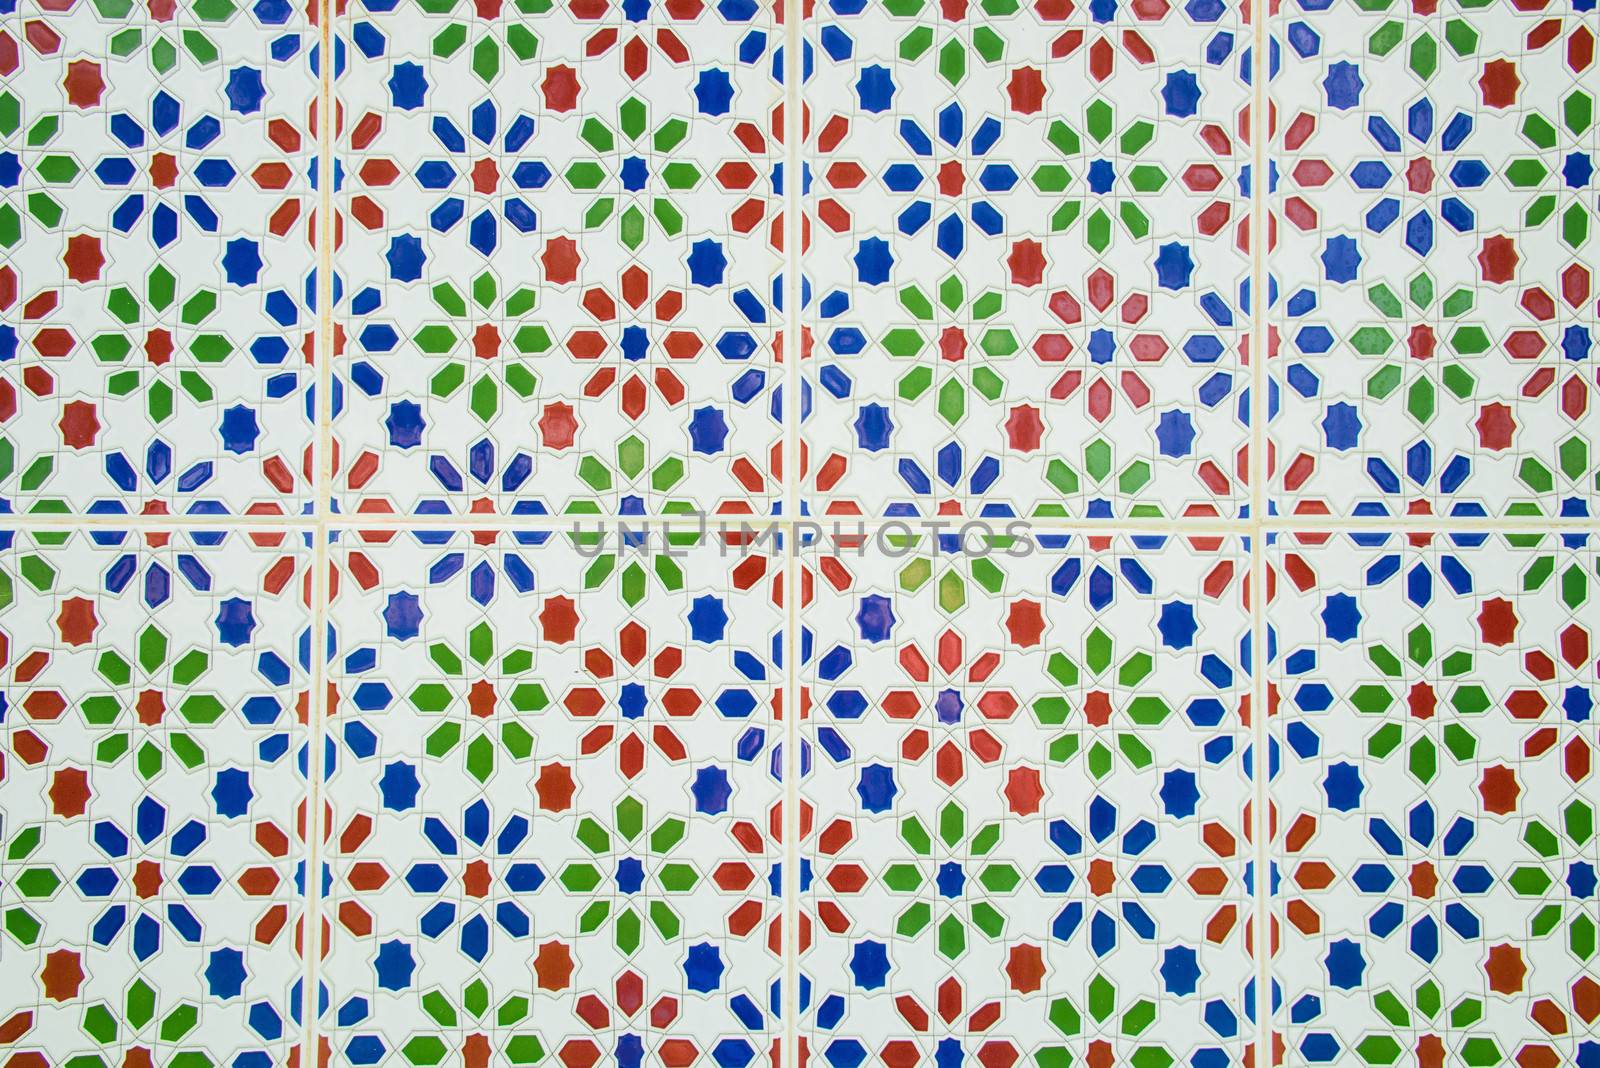 Spanish tiles by GryT